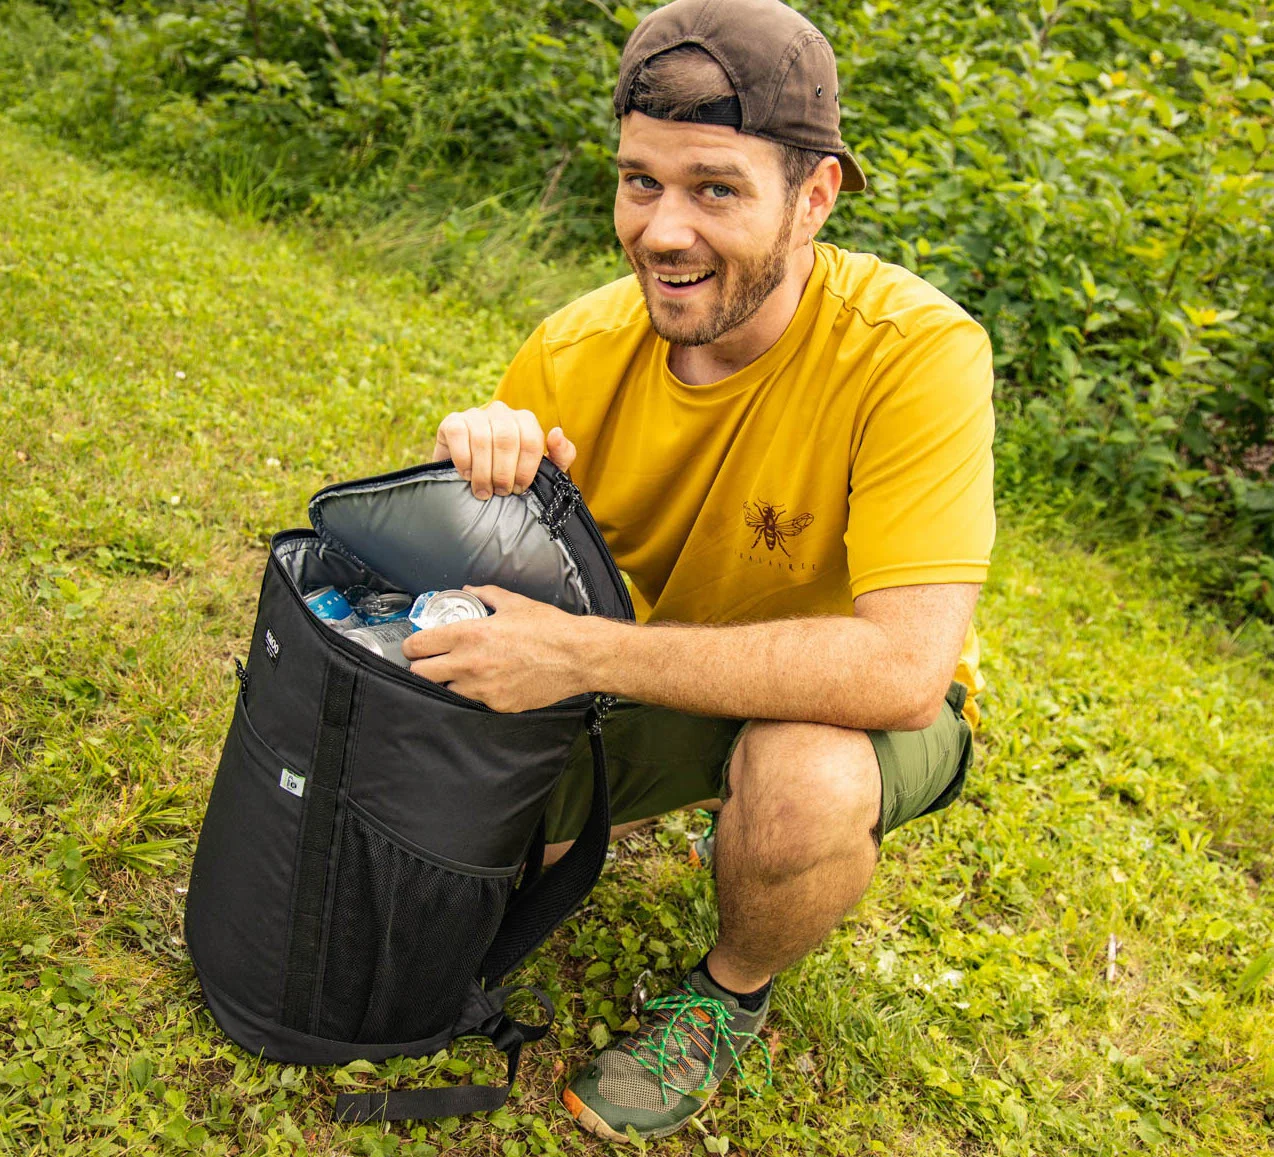 A smiling man grabs a can out of a backpack cooler filled with ice.